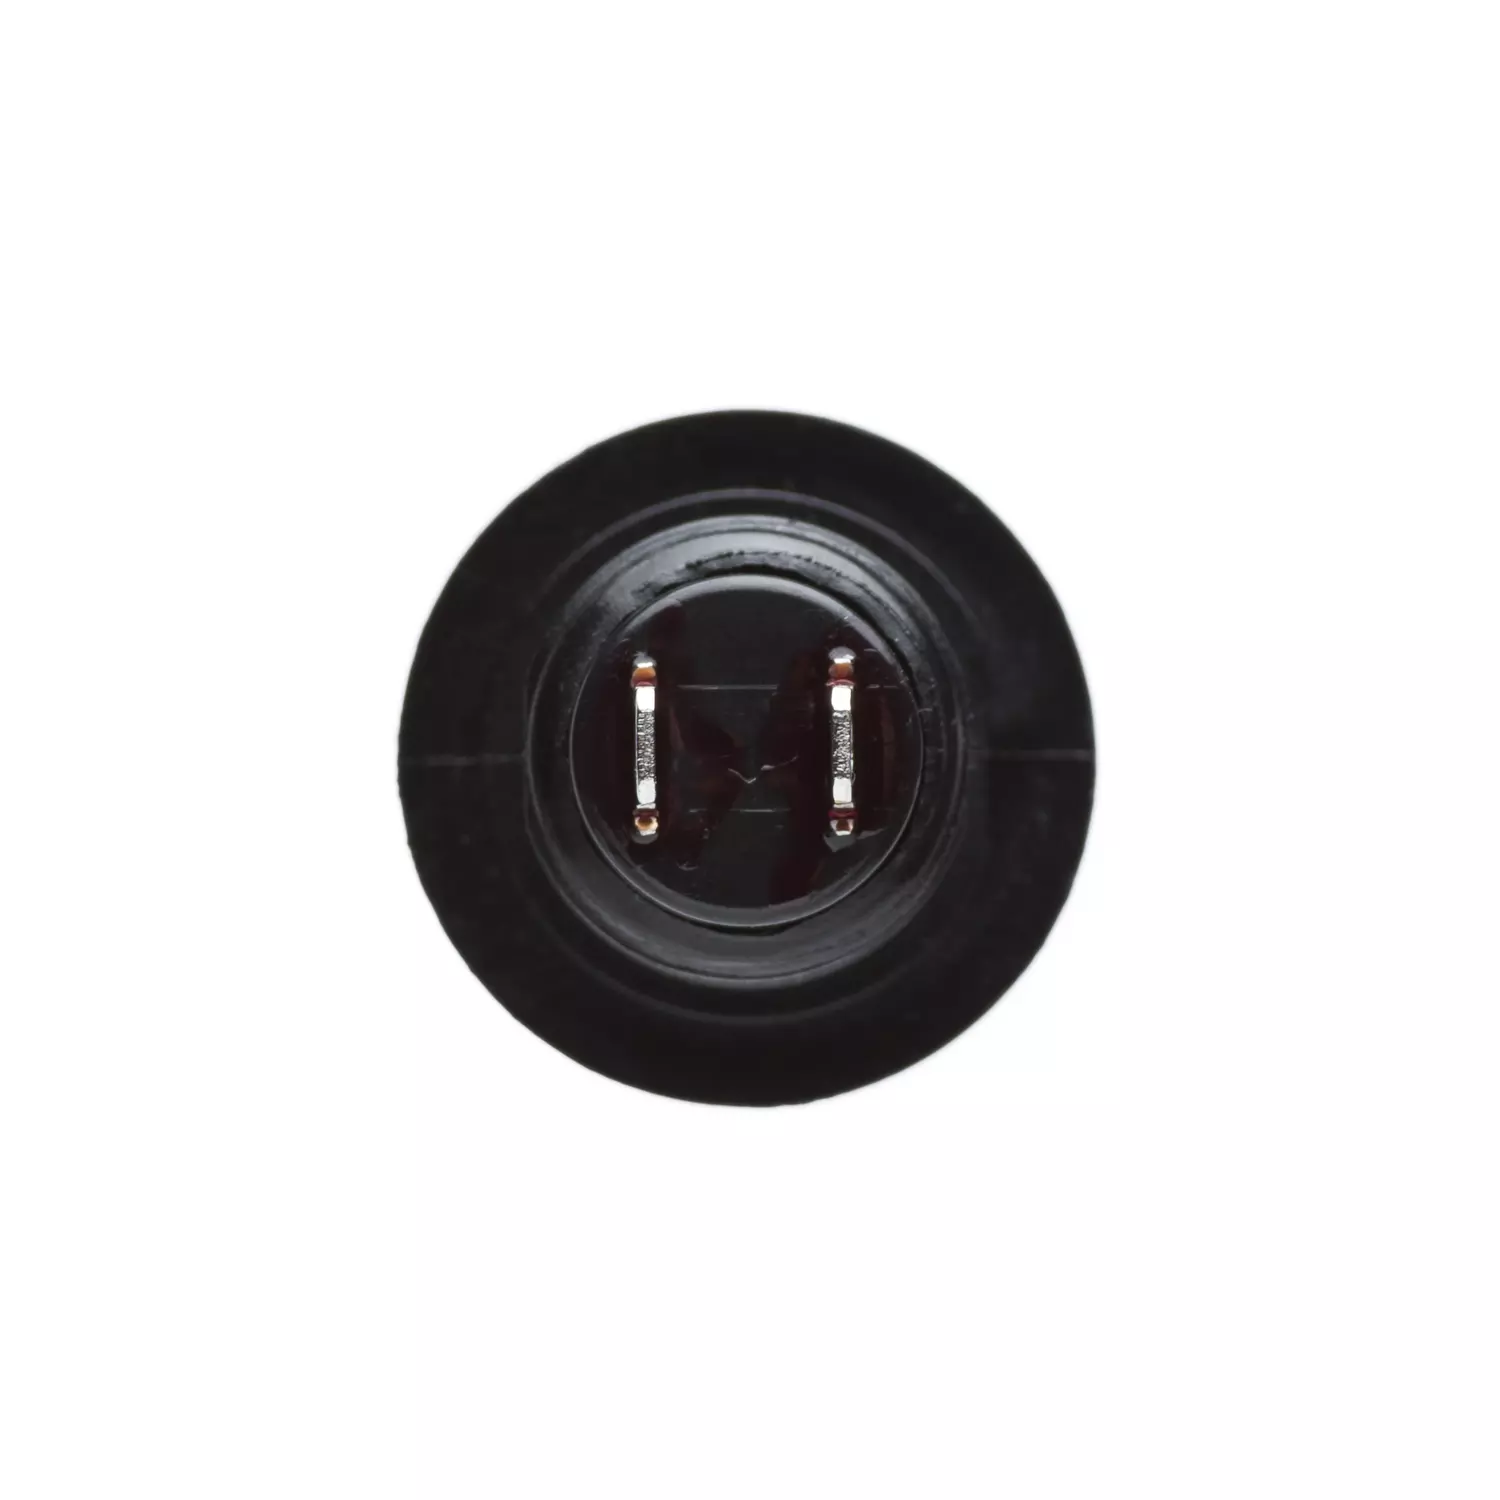 Photo of 12mm Momentary Push Button Dome - Green